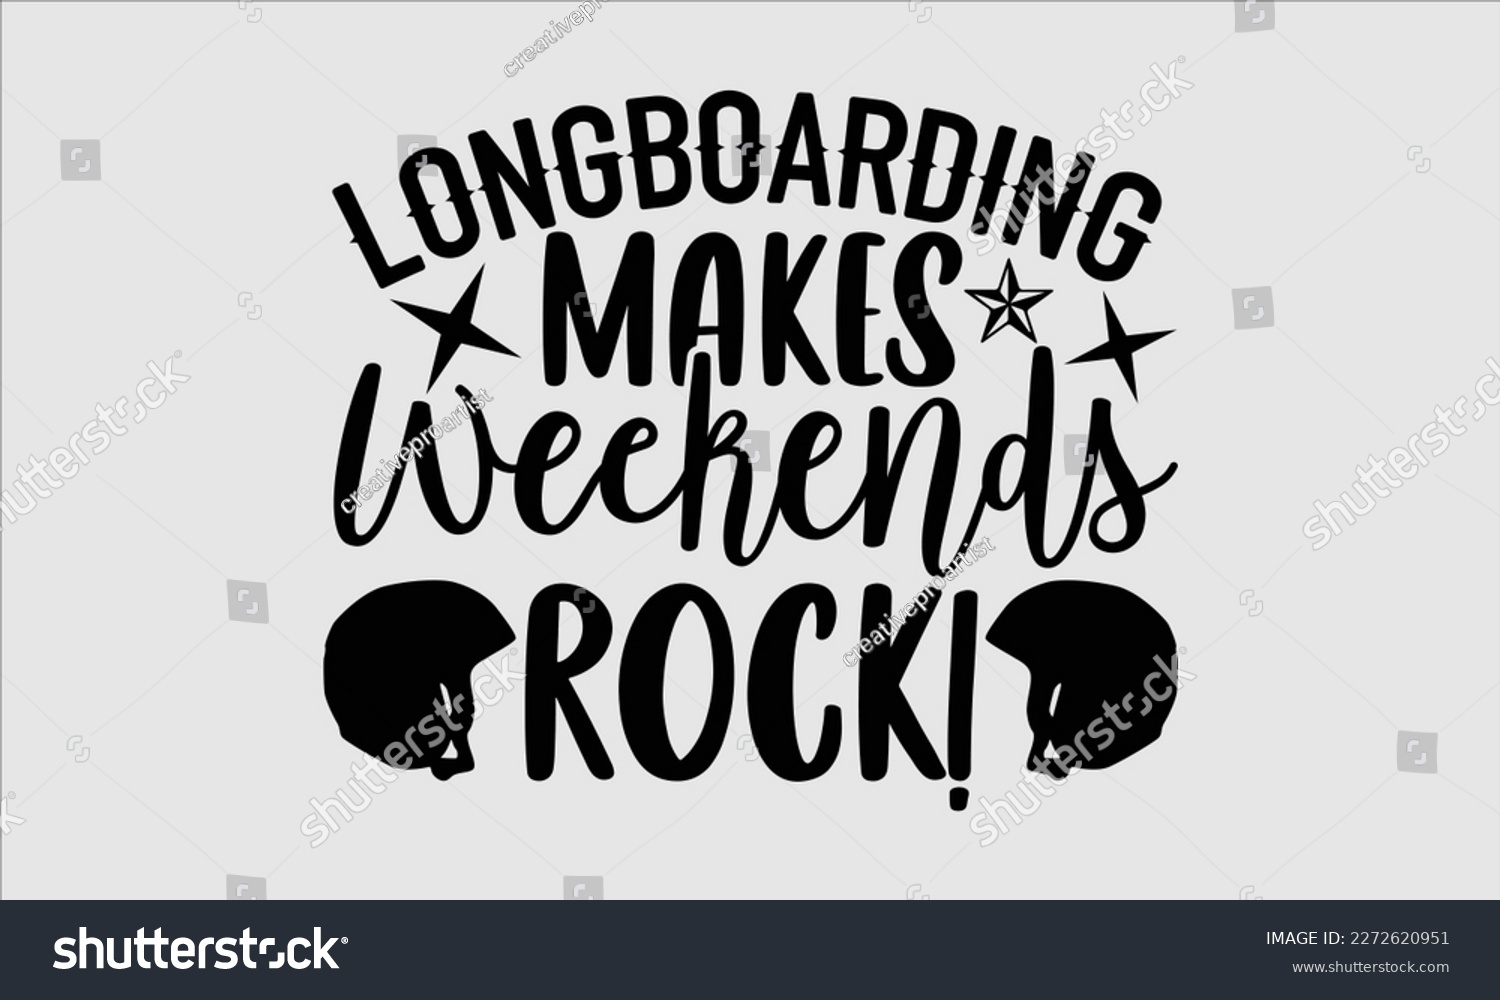 SVG of Longboarding makes weekends rock!- Longboarding T- shirt Design, Hand drawn lettering phrase, Illustration for prints on t-shirts and bags, posters, funny eps files, svg cricut svg